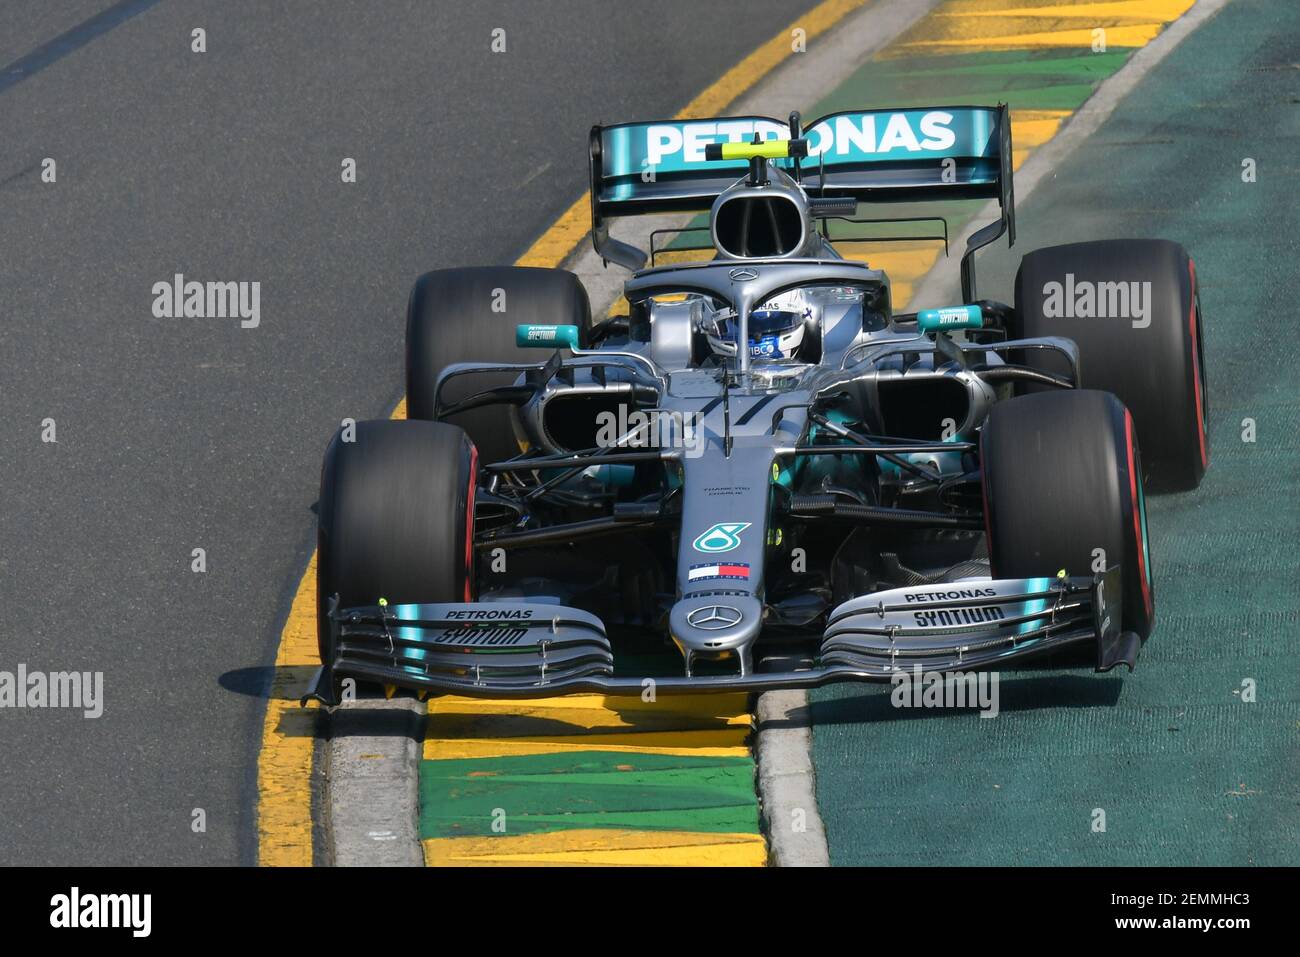 Valtteri Bottas (FIN) #77 from the Mercedes AMG Petronas Motorsport team rounds turn 2 during practice session three at the 2019 Australian Formula One Grand Prix at Albert Park, Melbourne, Australia Stock Photo